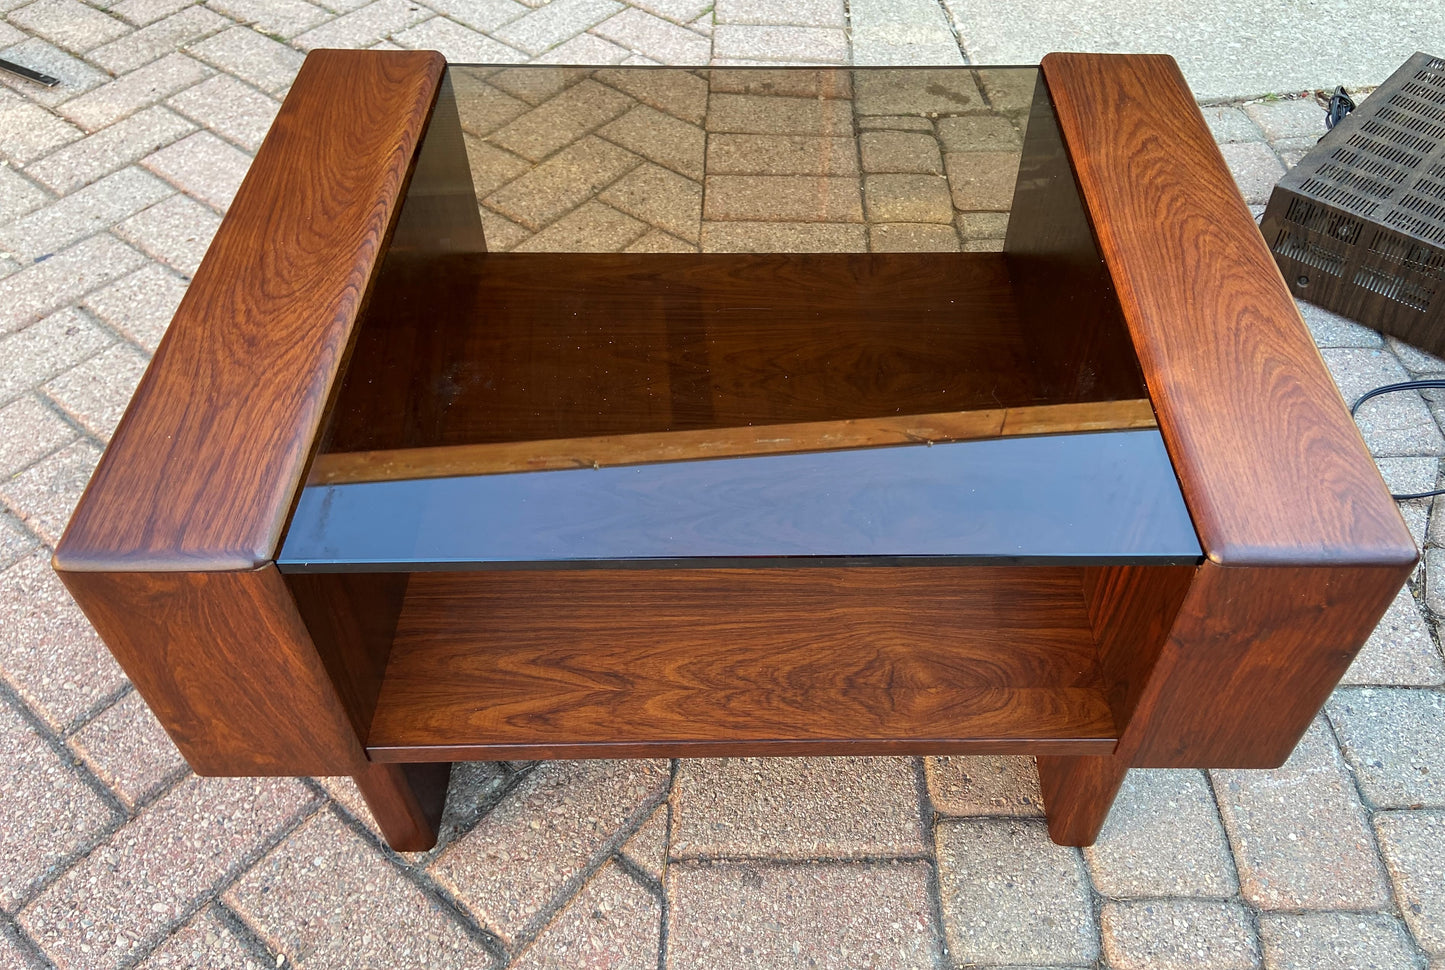 REFINISHED Mid Century Modern Rosewood Accent Table with storage & tinted glass top